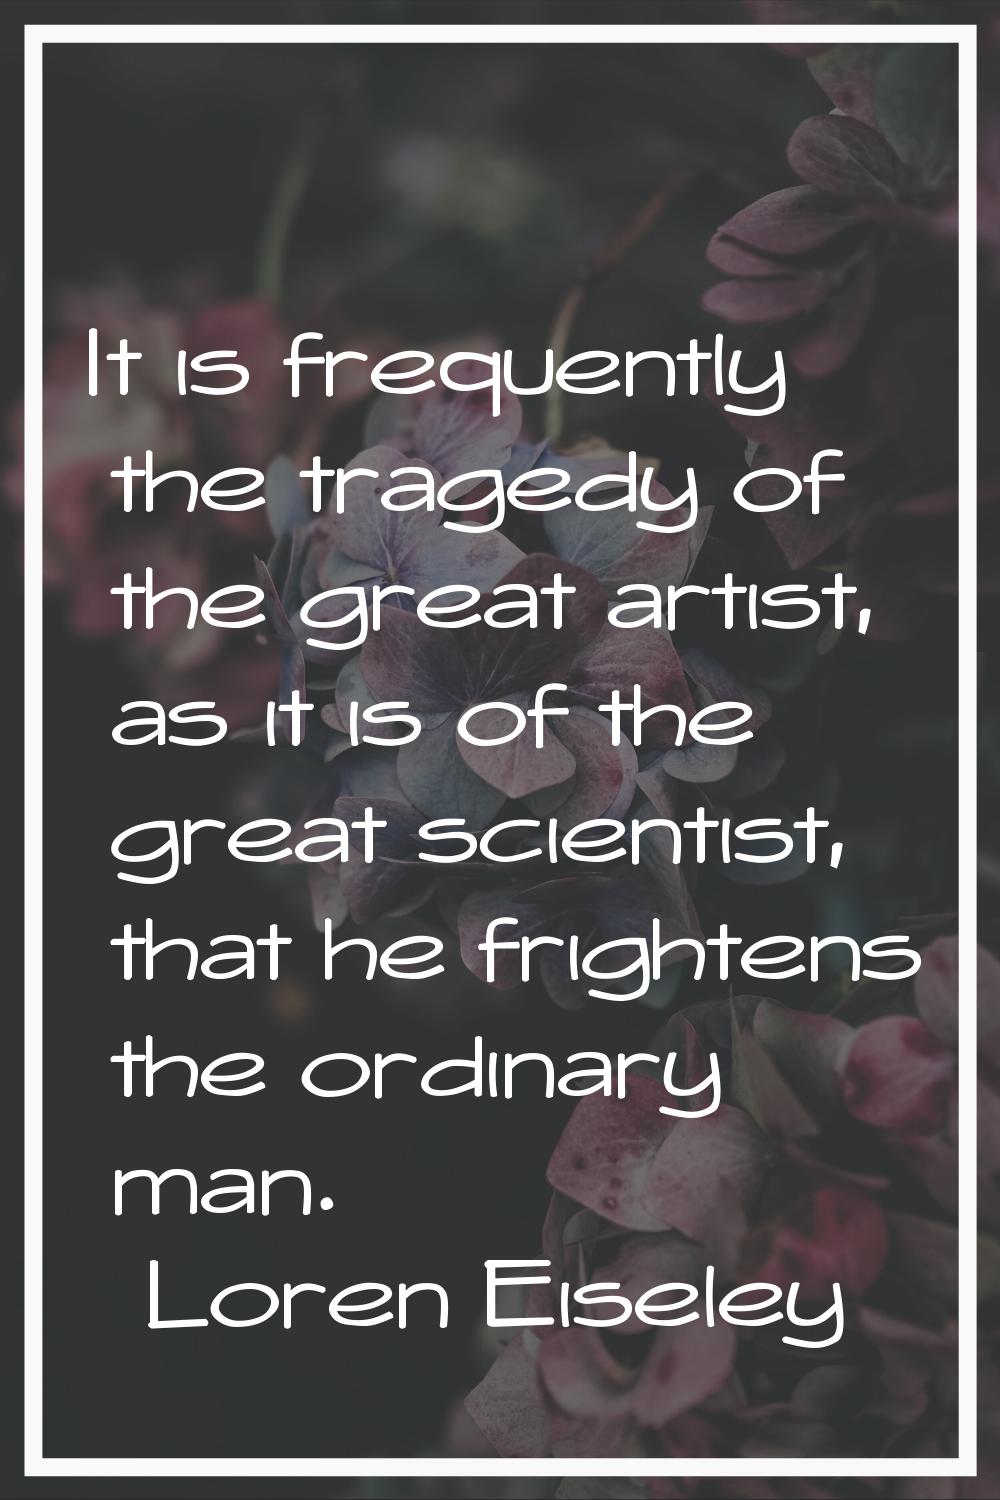 It is frequently the tragedy of the great artist, as it is of the great scientist, that he frighten